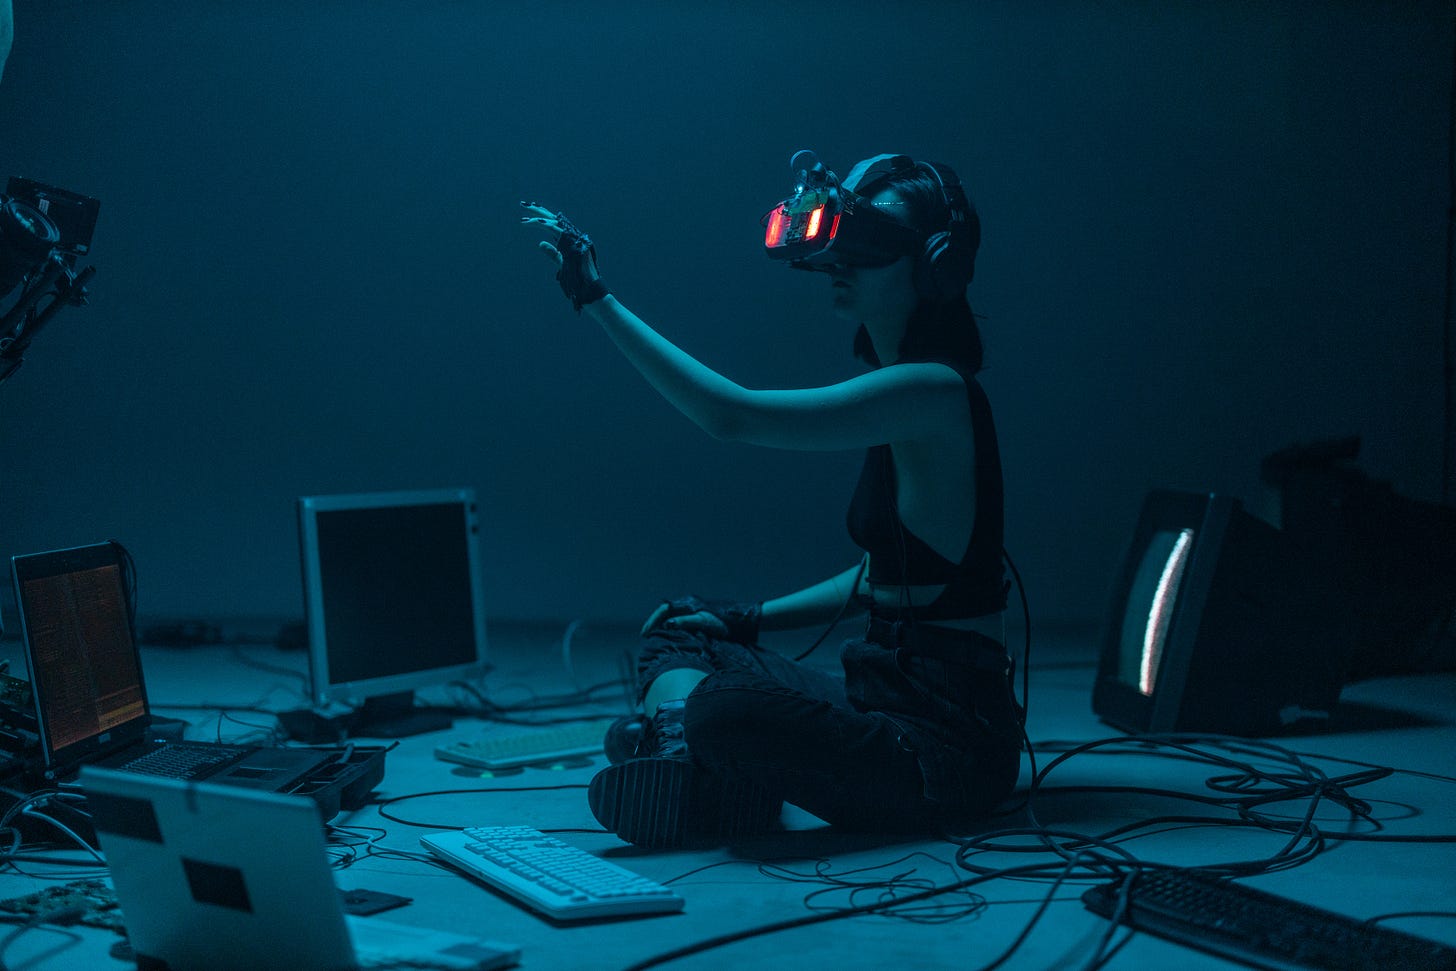 Girl in an alternate reality using a VR headset surrounded by computers in a dark room